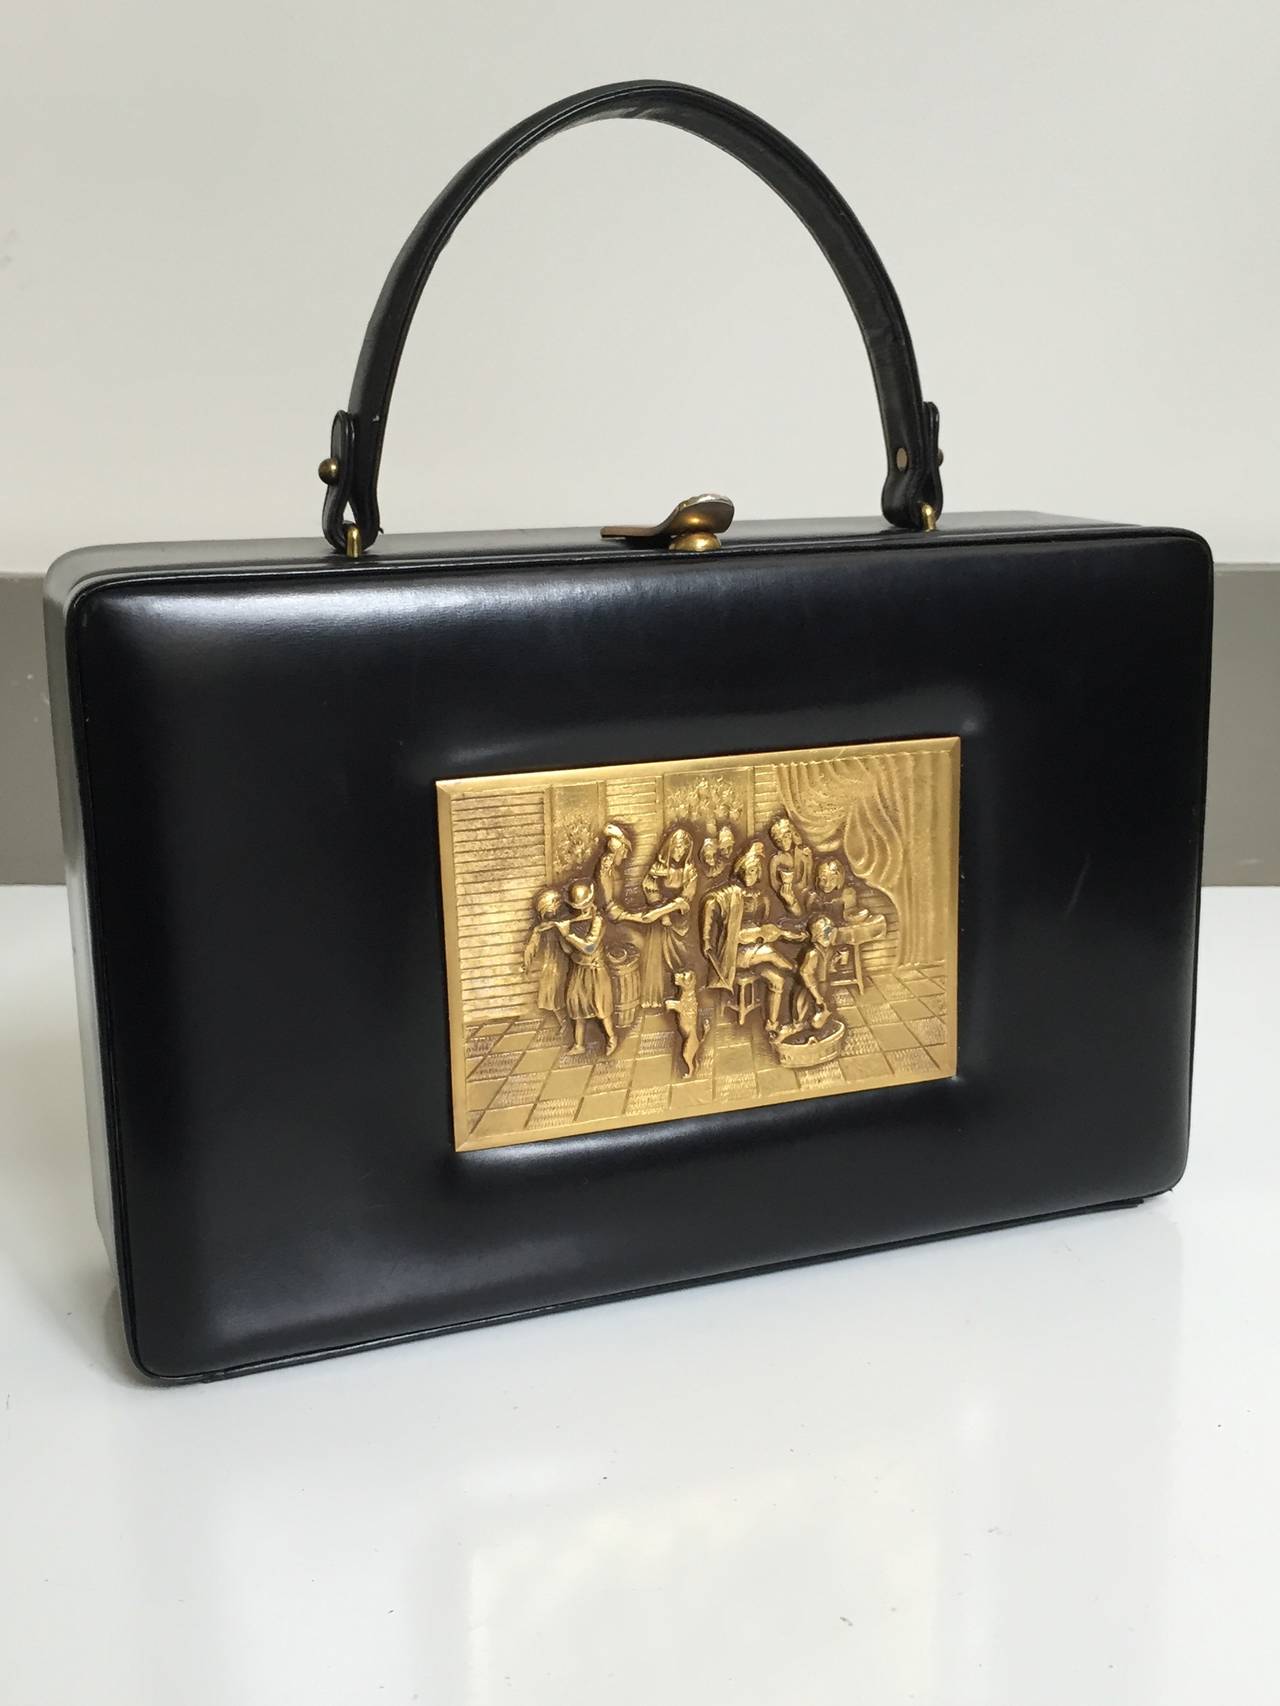 Prestige 1960s French brass relief scene square black leather lunch box style handbag. Interior tan leather is impeccable with two compartments with gold trim. The handle drop is 4